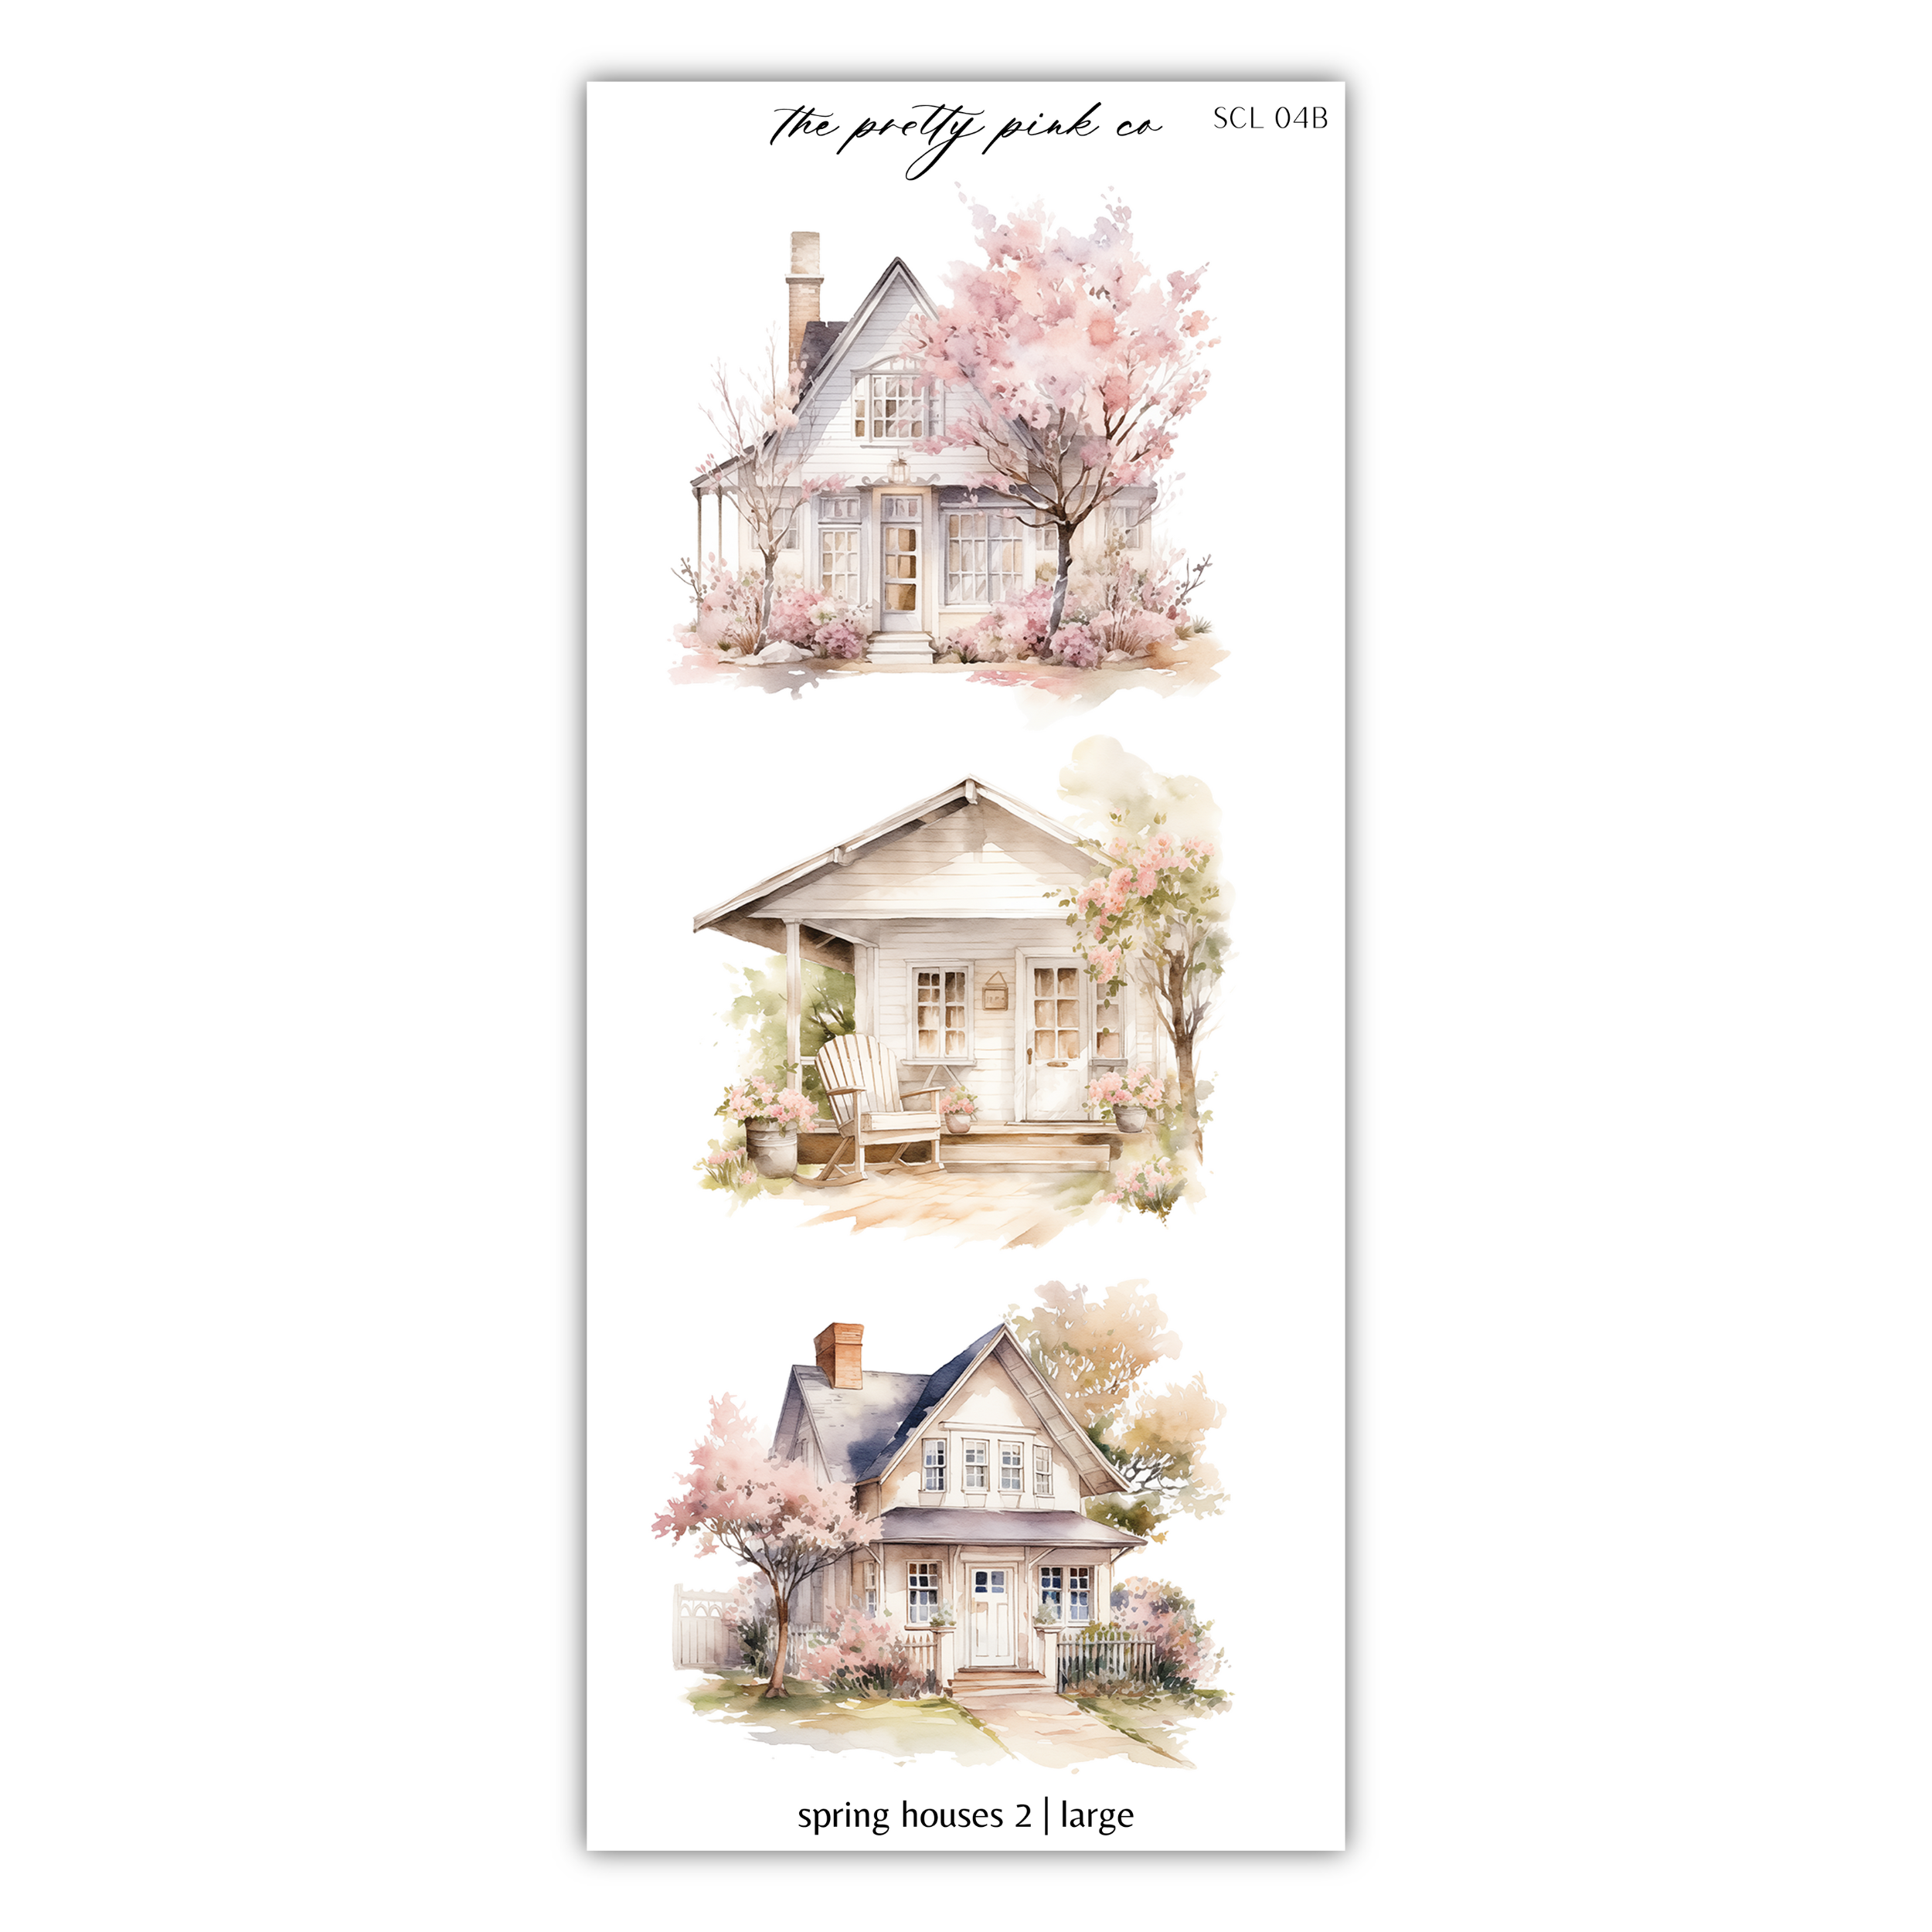 a watercolor painting of a house and trees